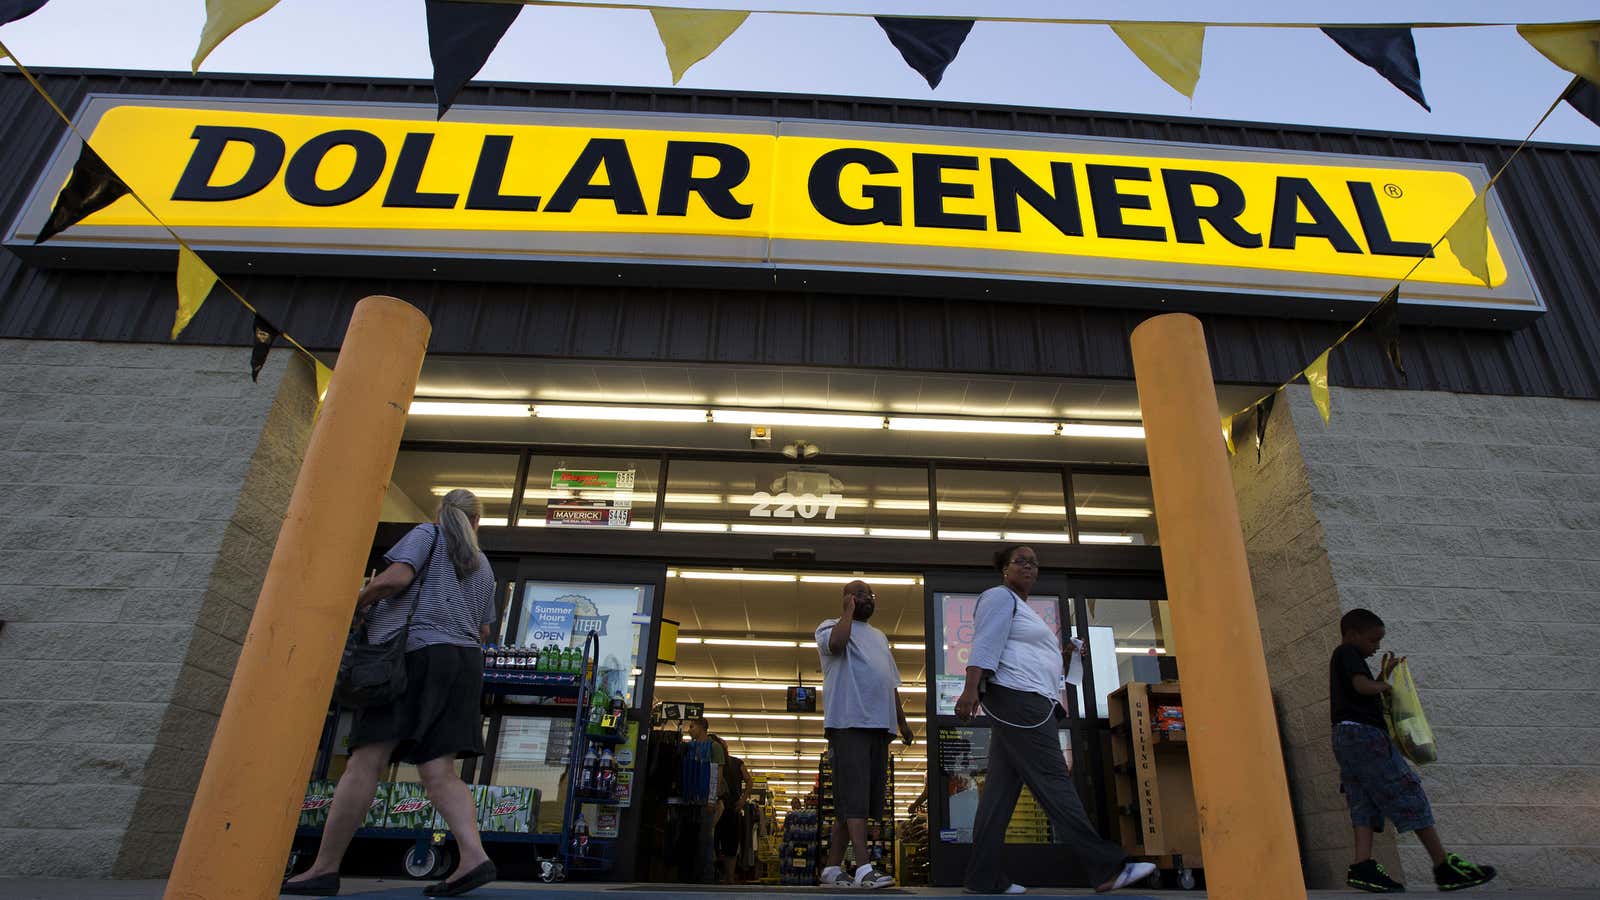 Traffic has been picking up, but profits at dollar stores have been under pressure.